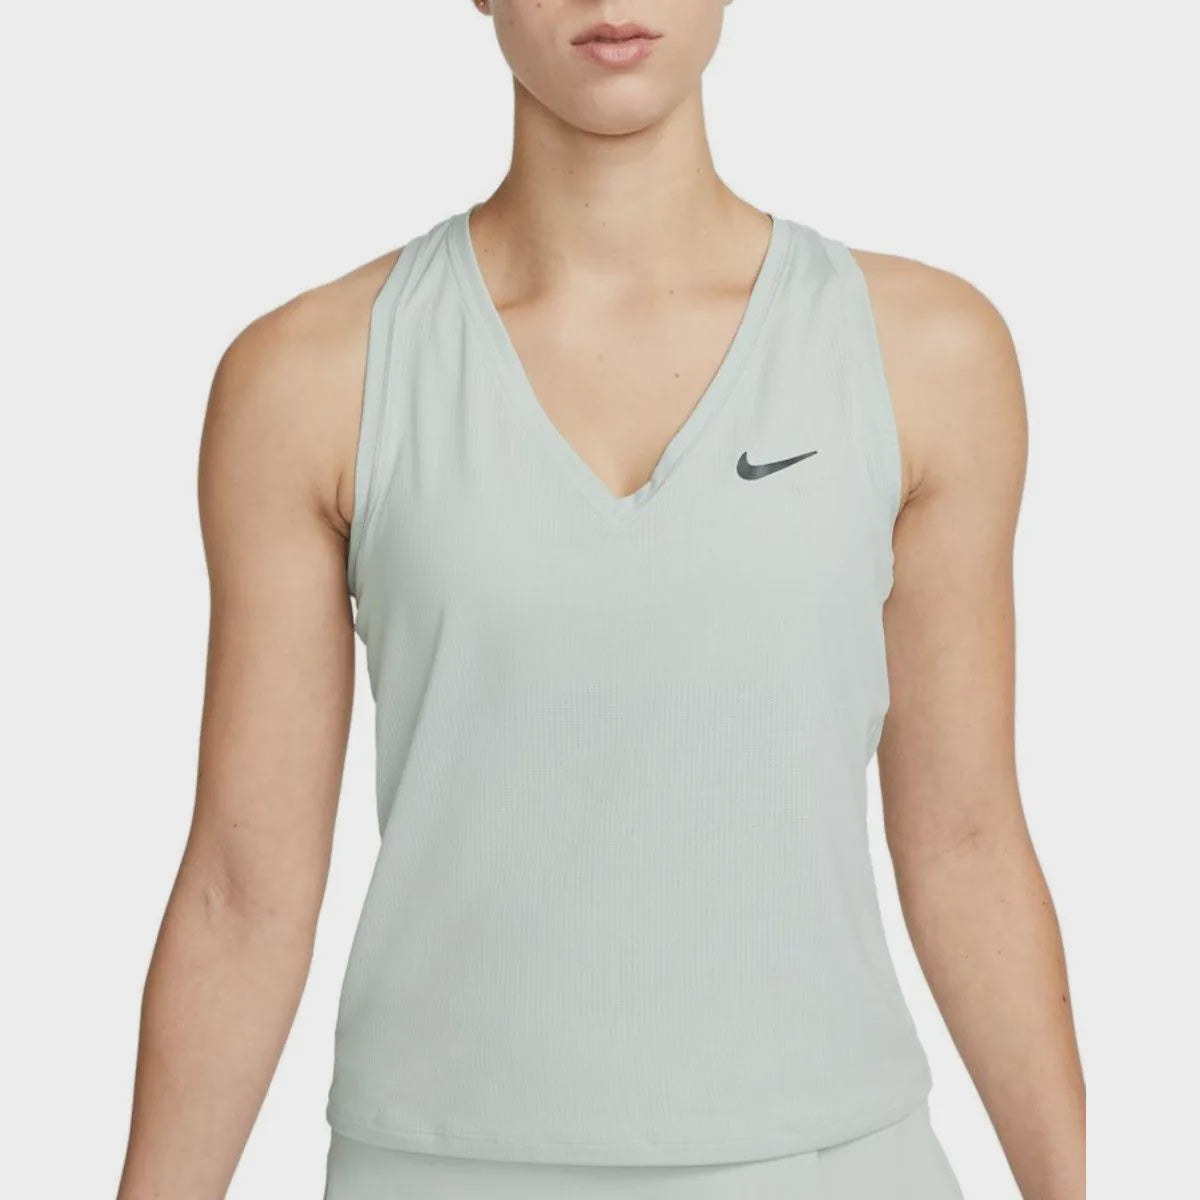 Women's Victory Tank - CV4784-034 – All About Tennis